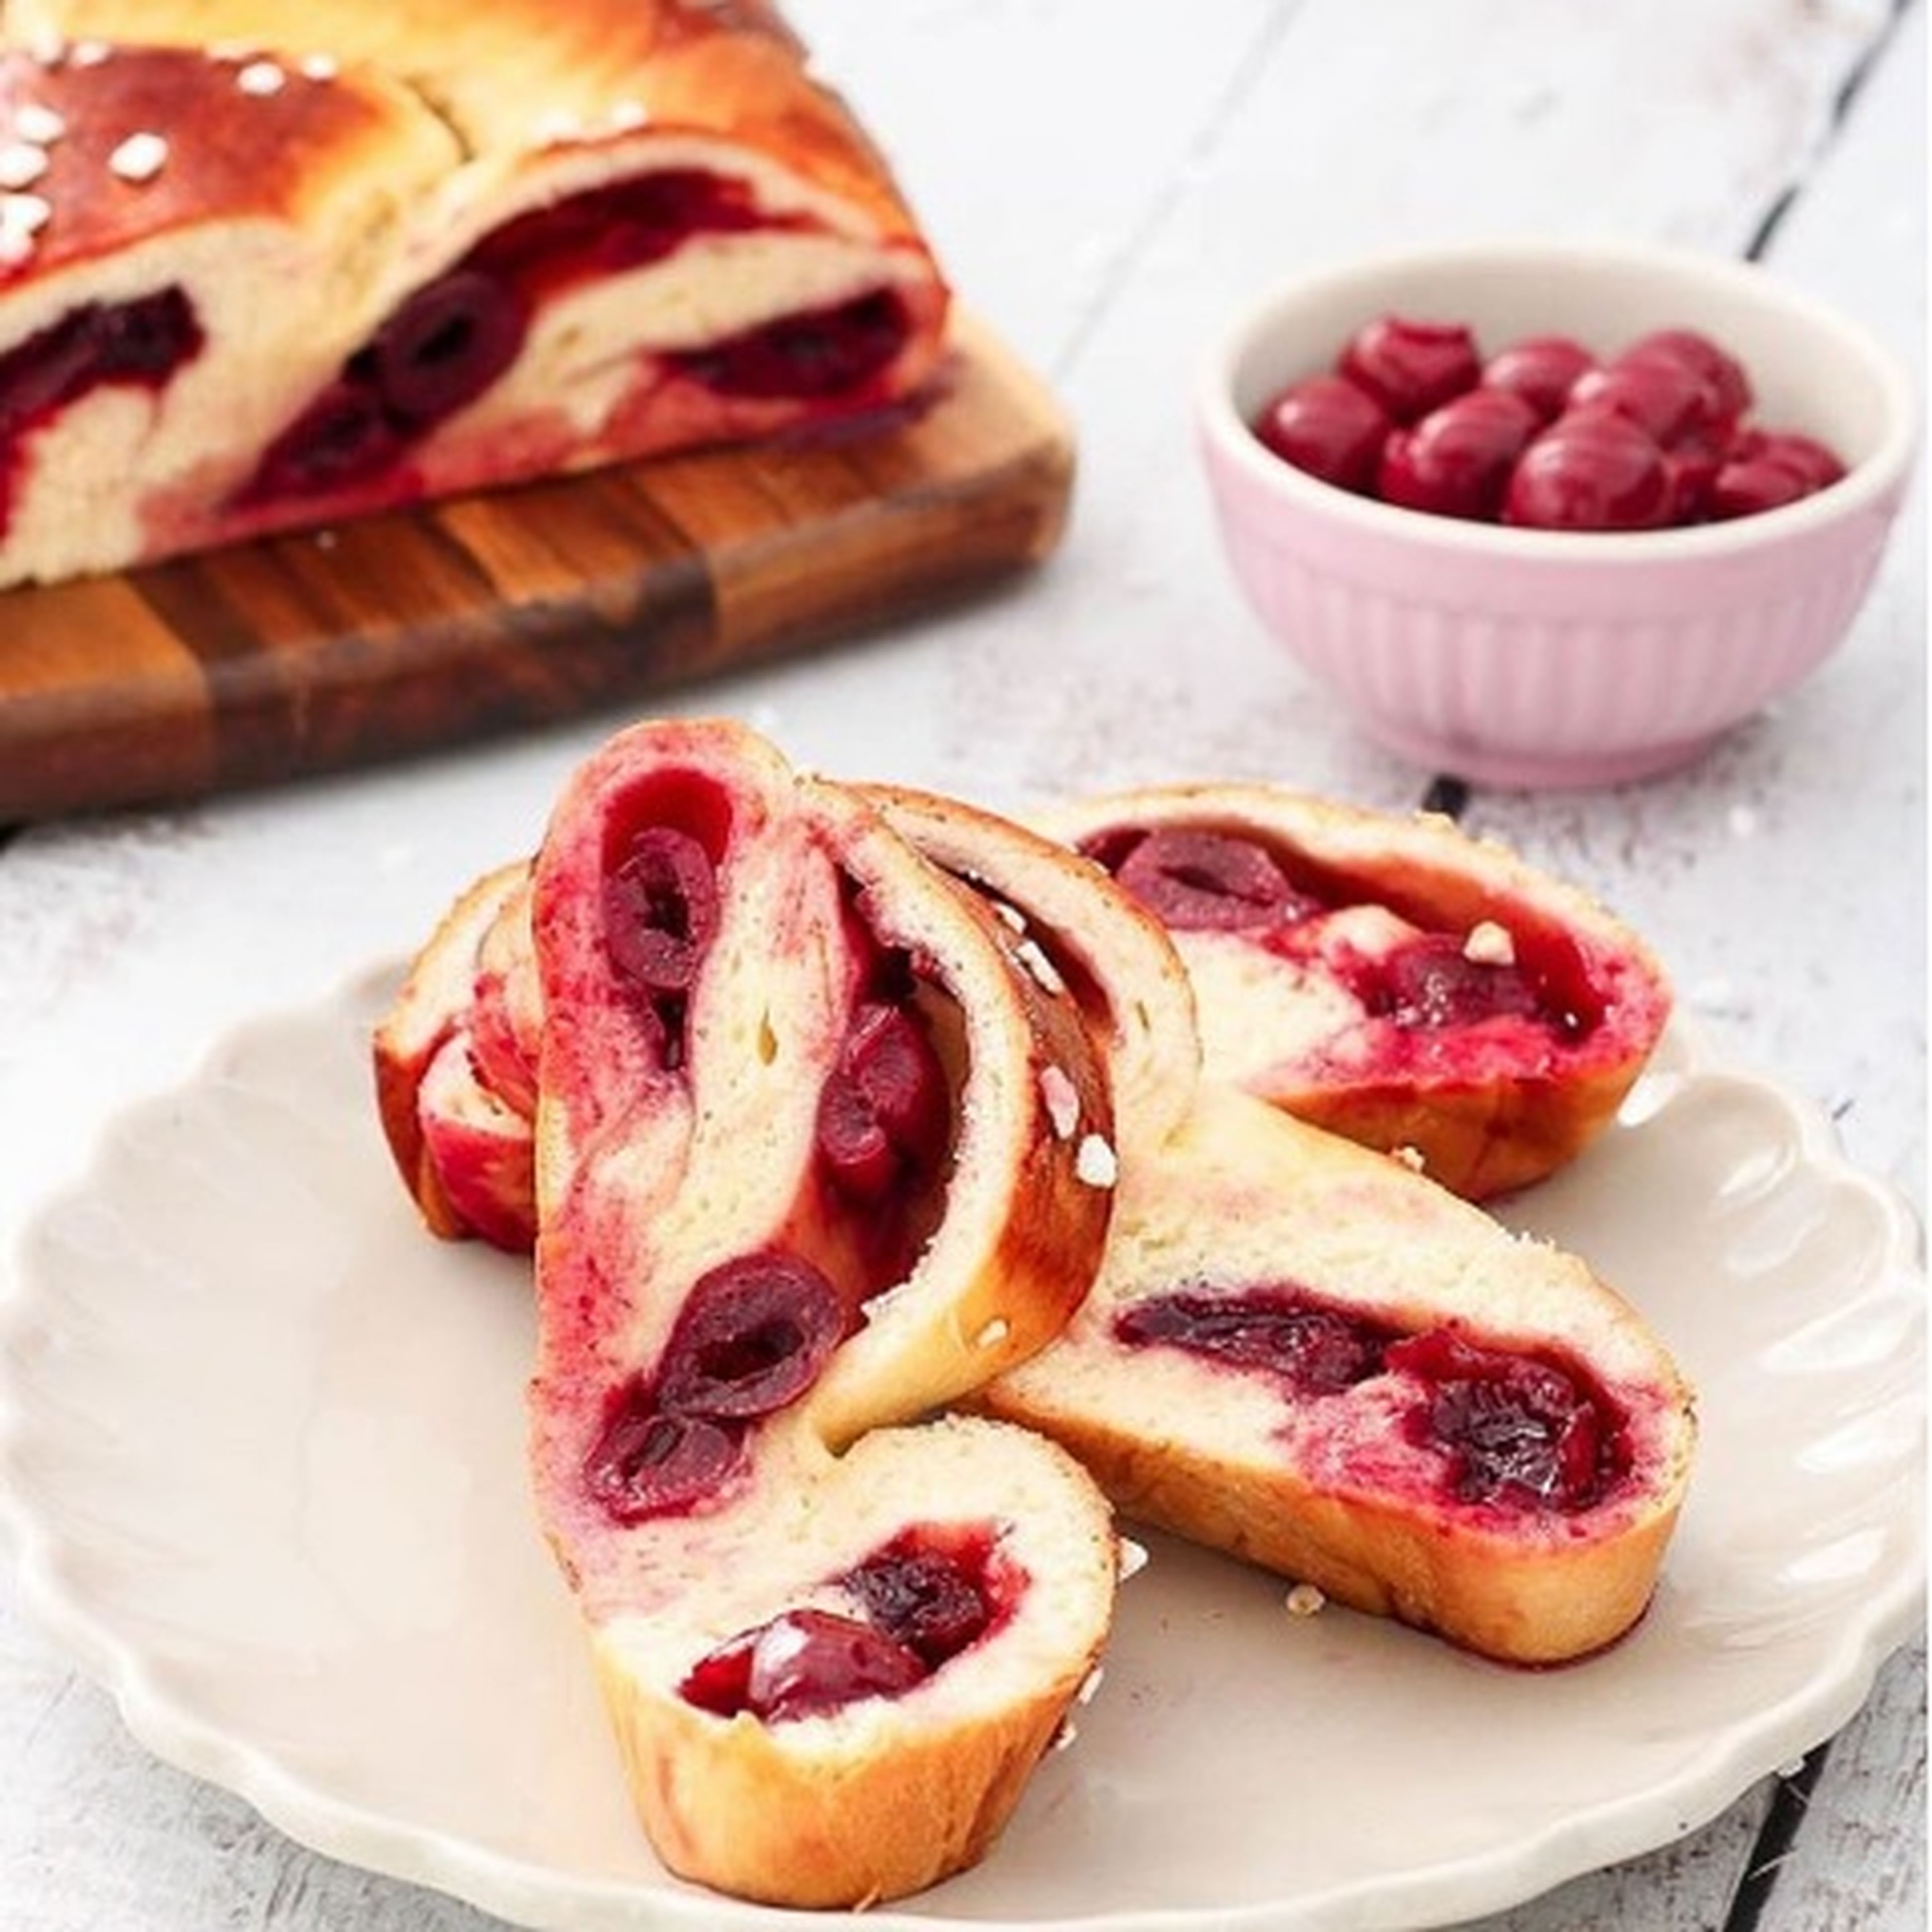 Braided Easter bread with cherries